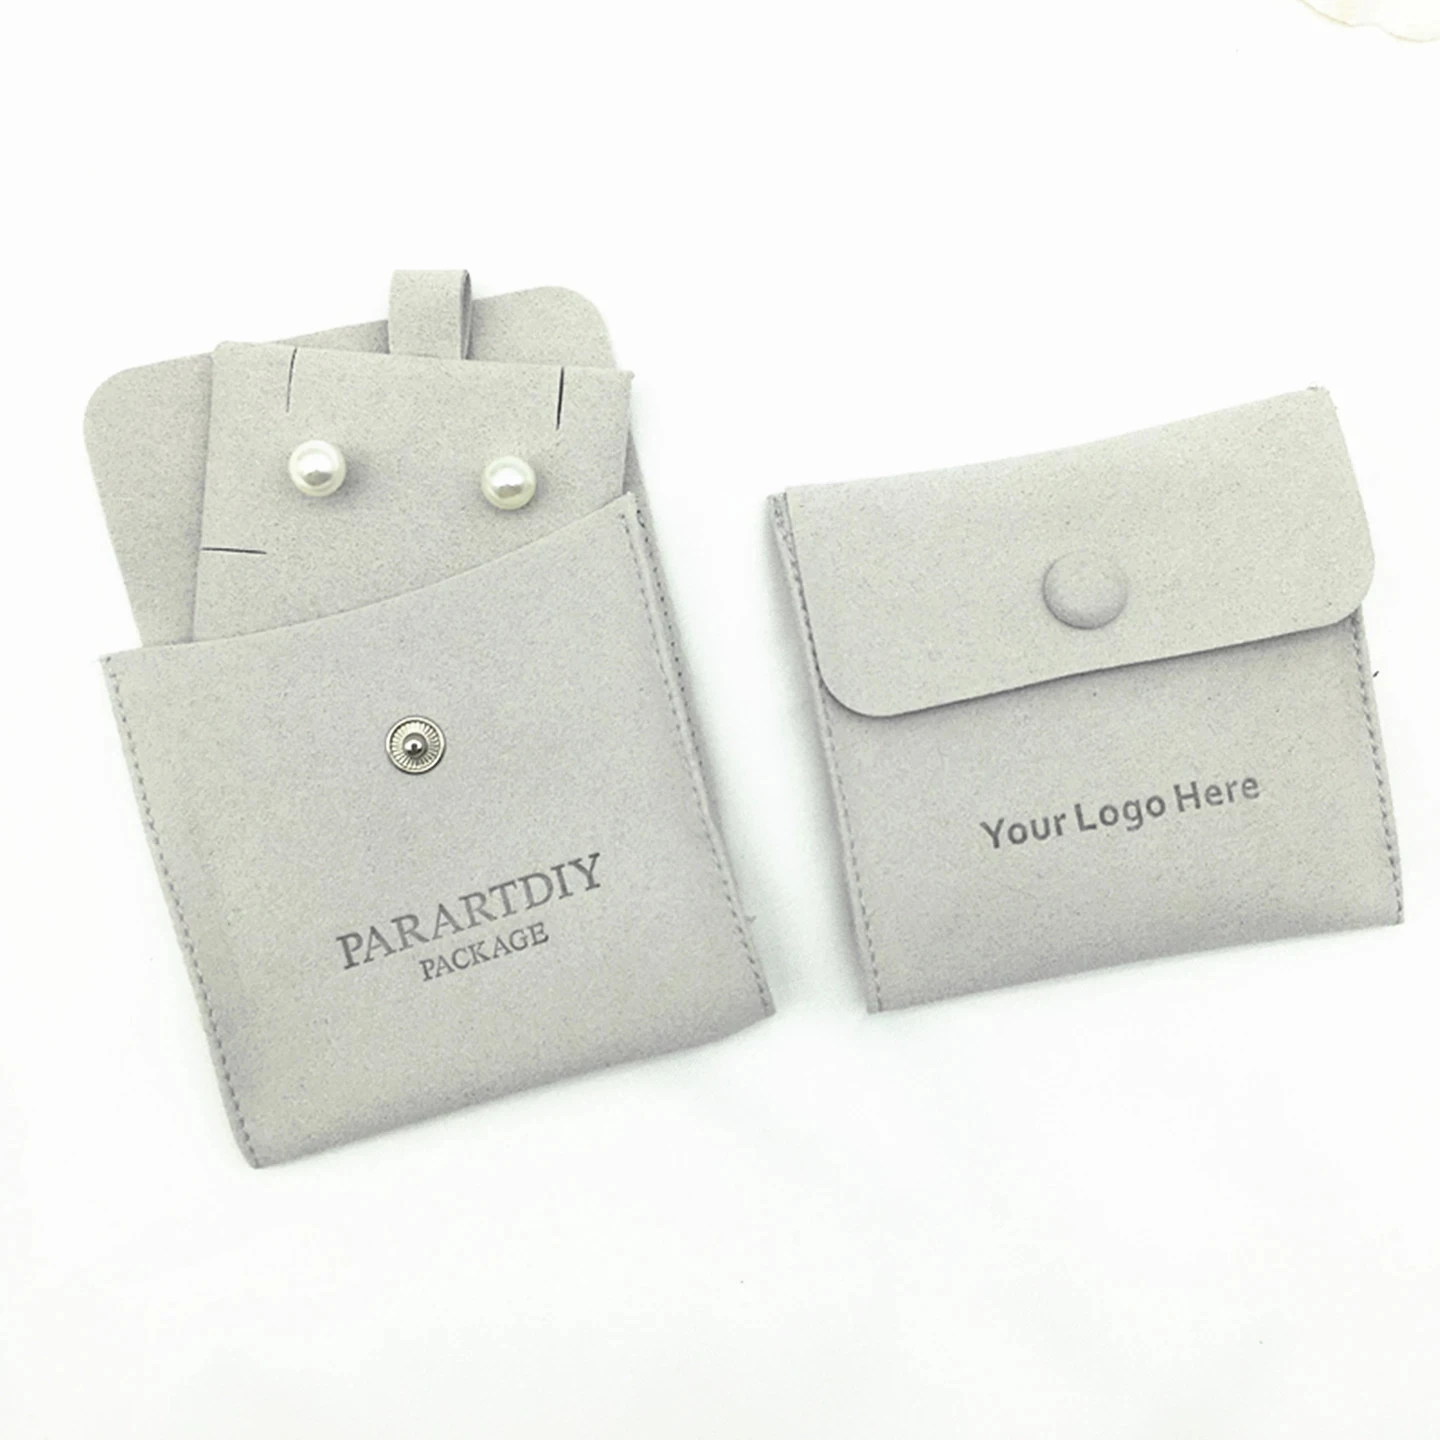 50 sets of gray personalized jewelry packaging bag custom logo button bag fashion small envelope bag necklace clip microfiber